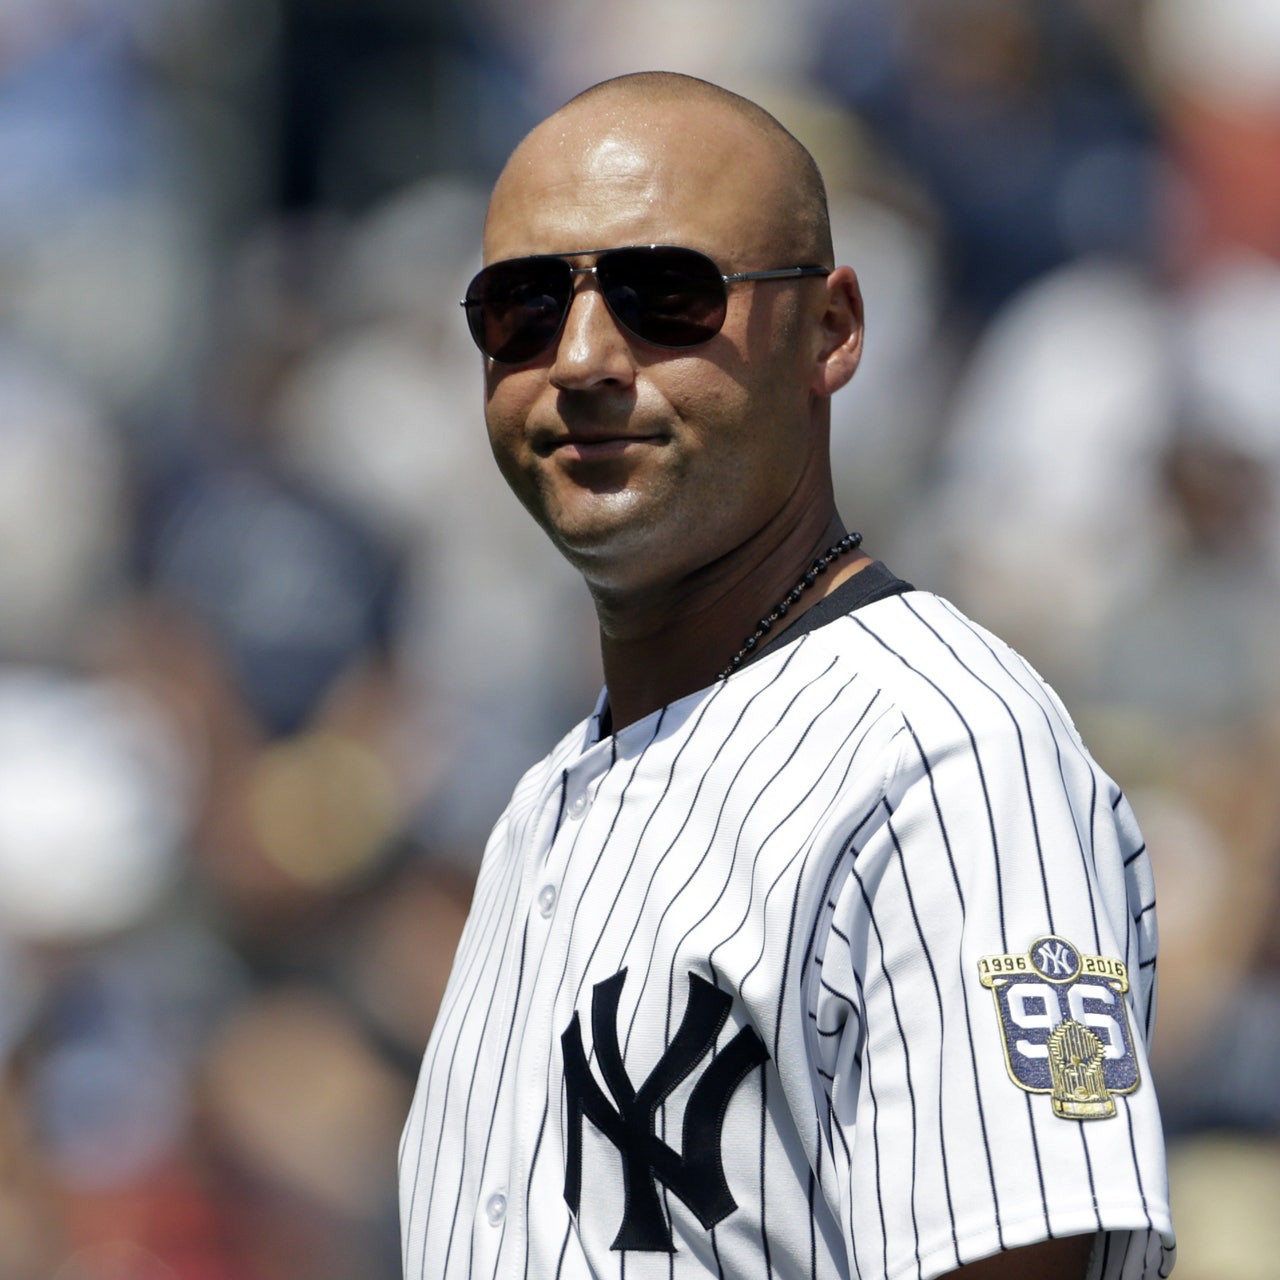 Appreciating the retired single-digit numbers of the New York Yankees